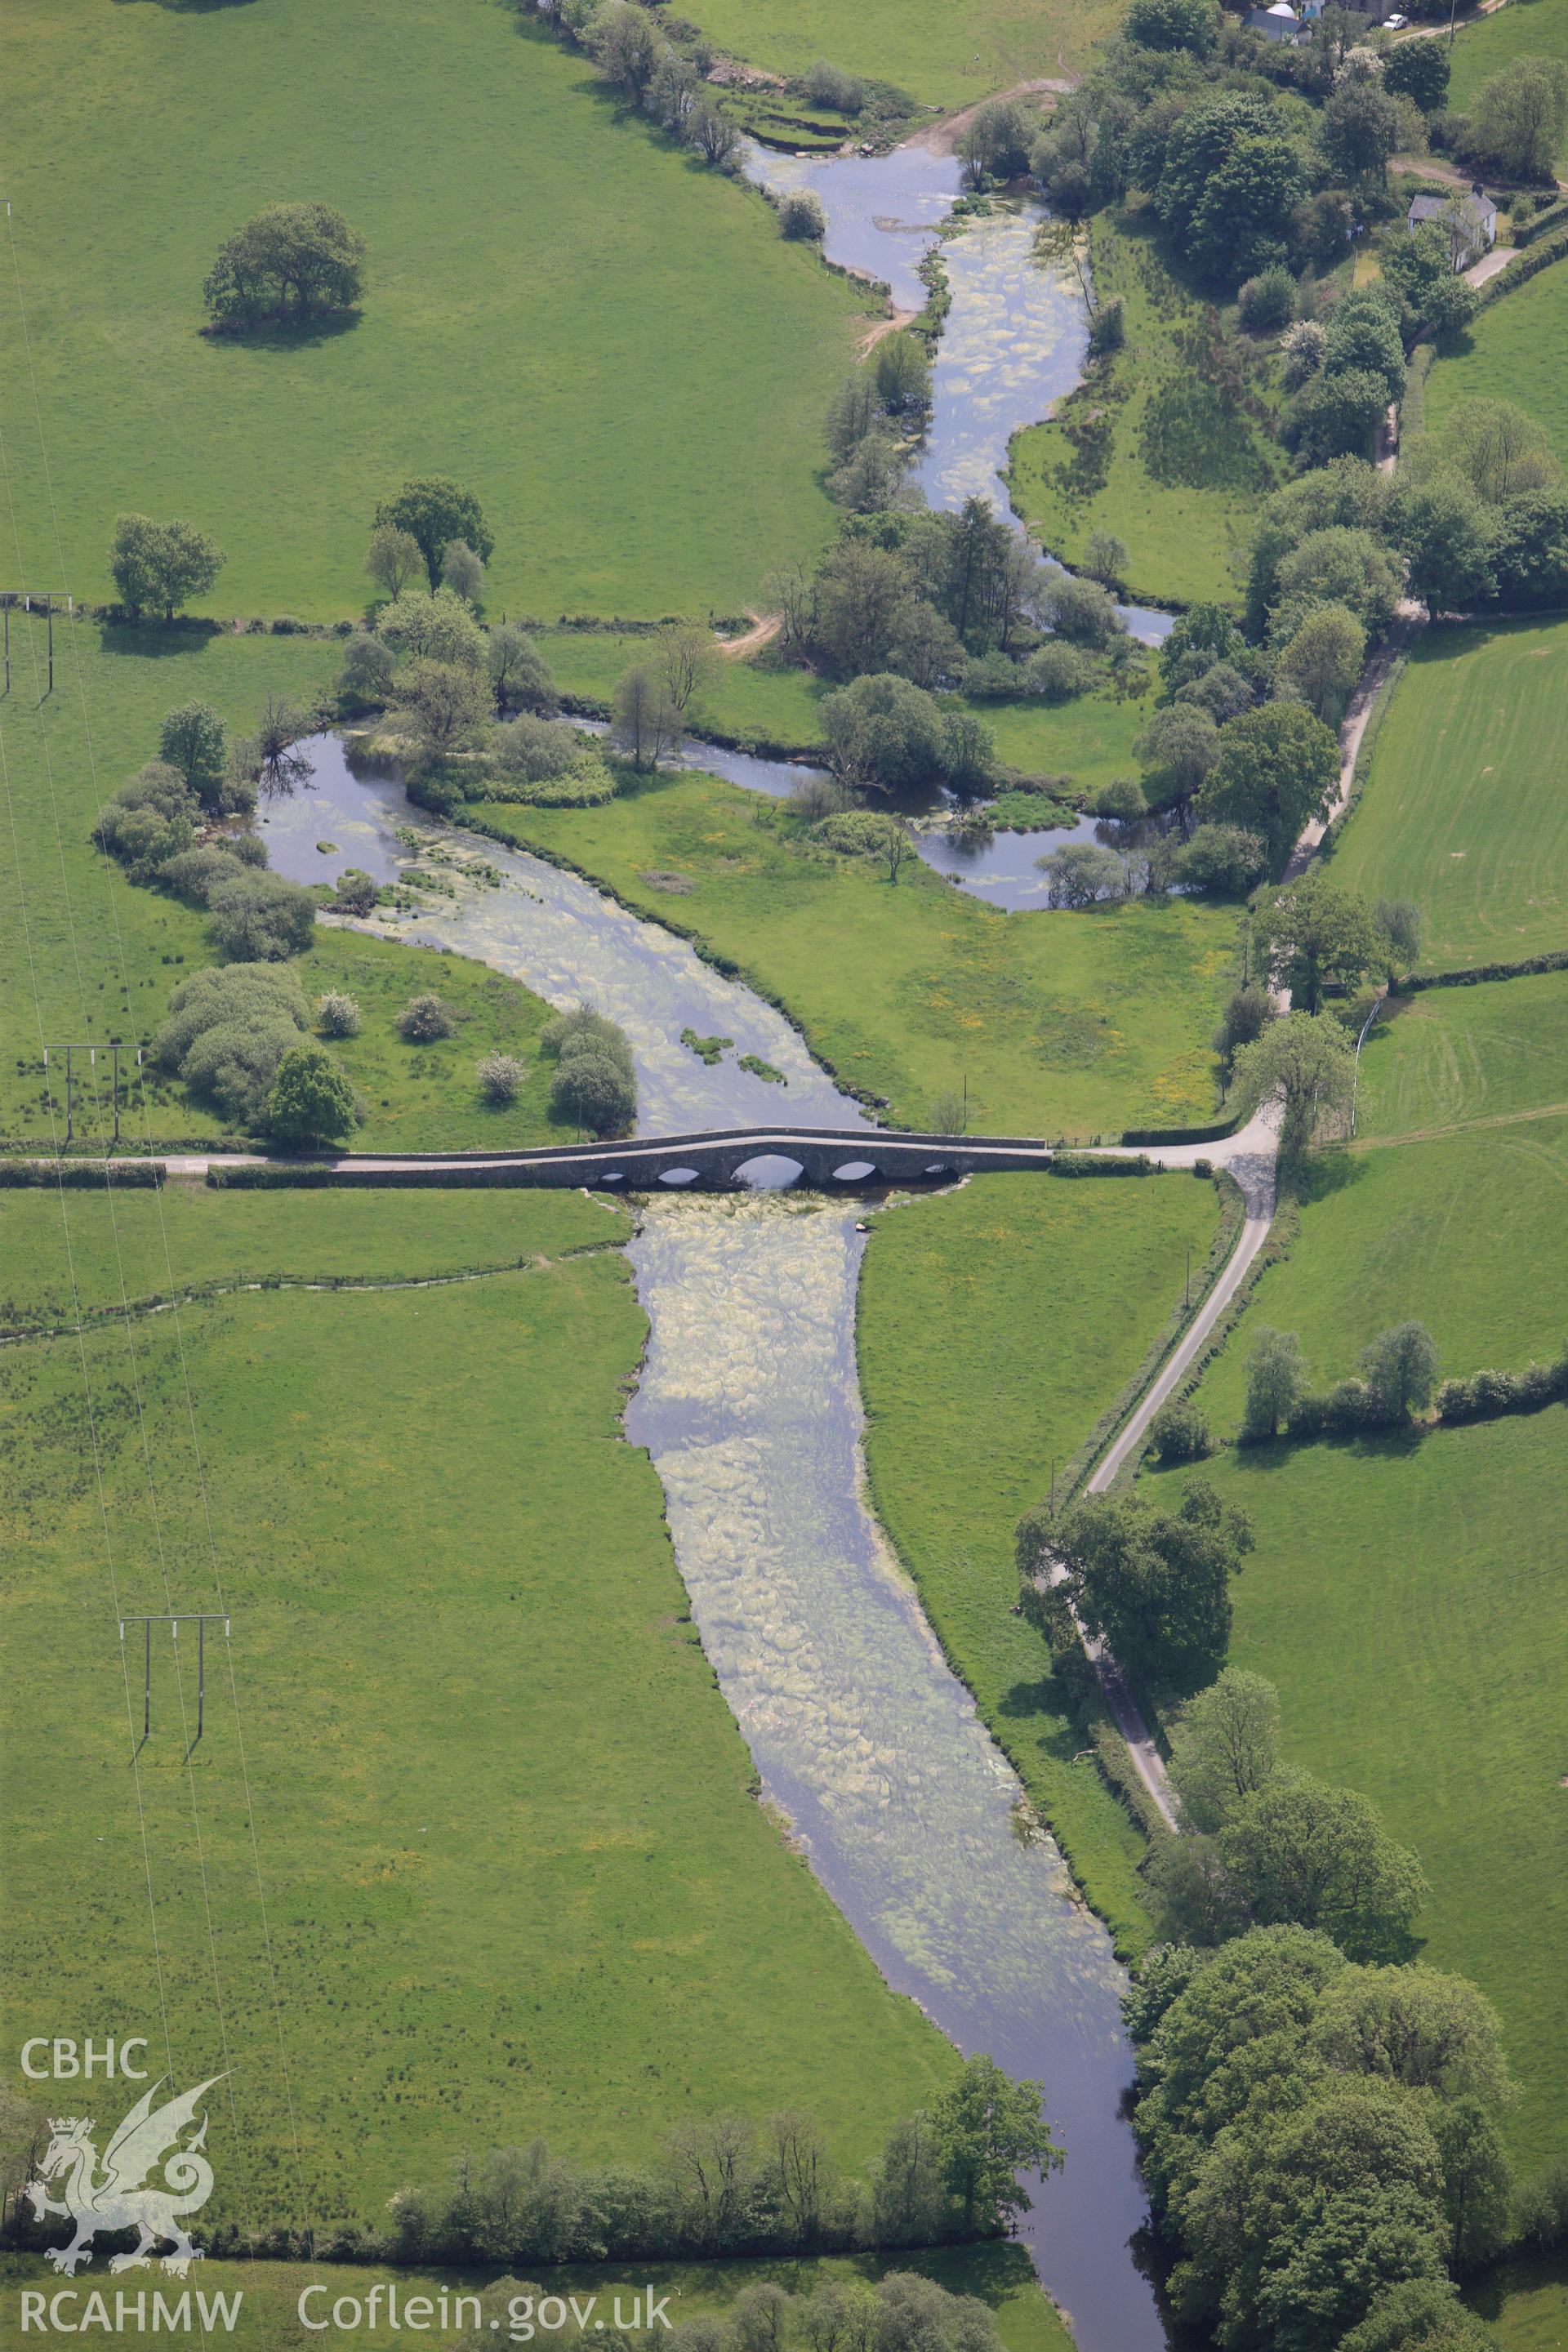 RCAHMW colour oblique photograph of Pont Gogoyan. Taken by Toby Driver on 28/05/2012.